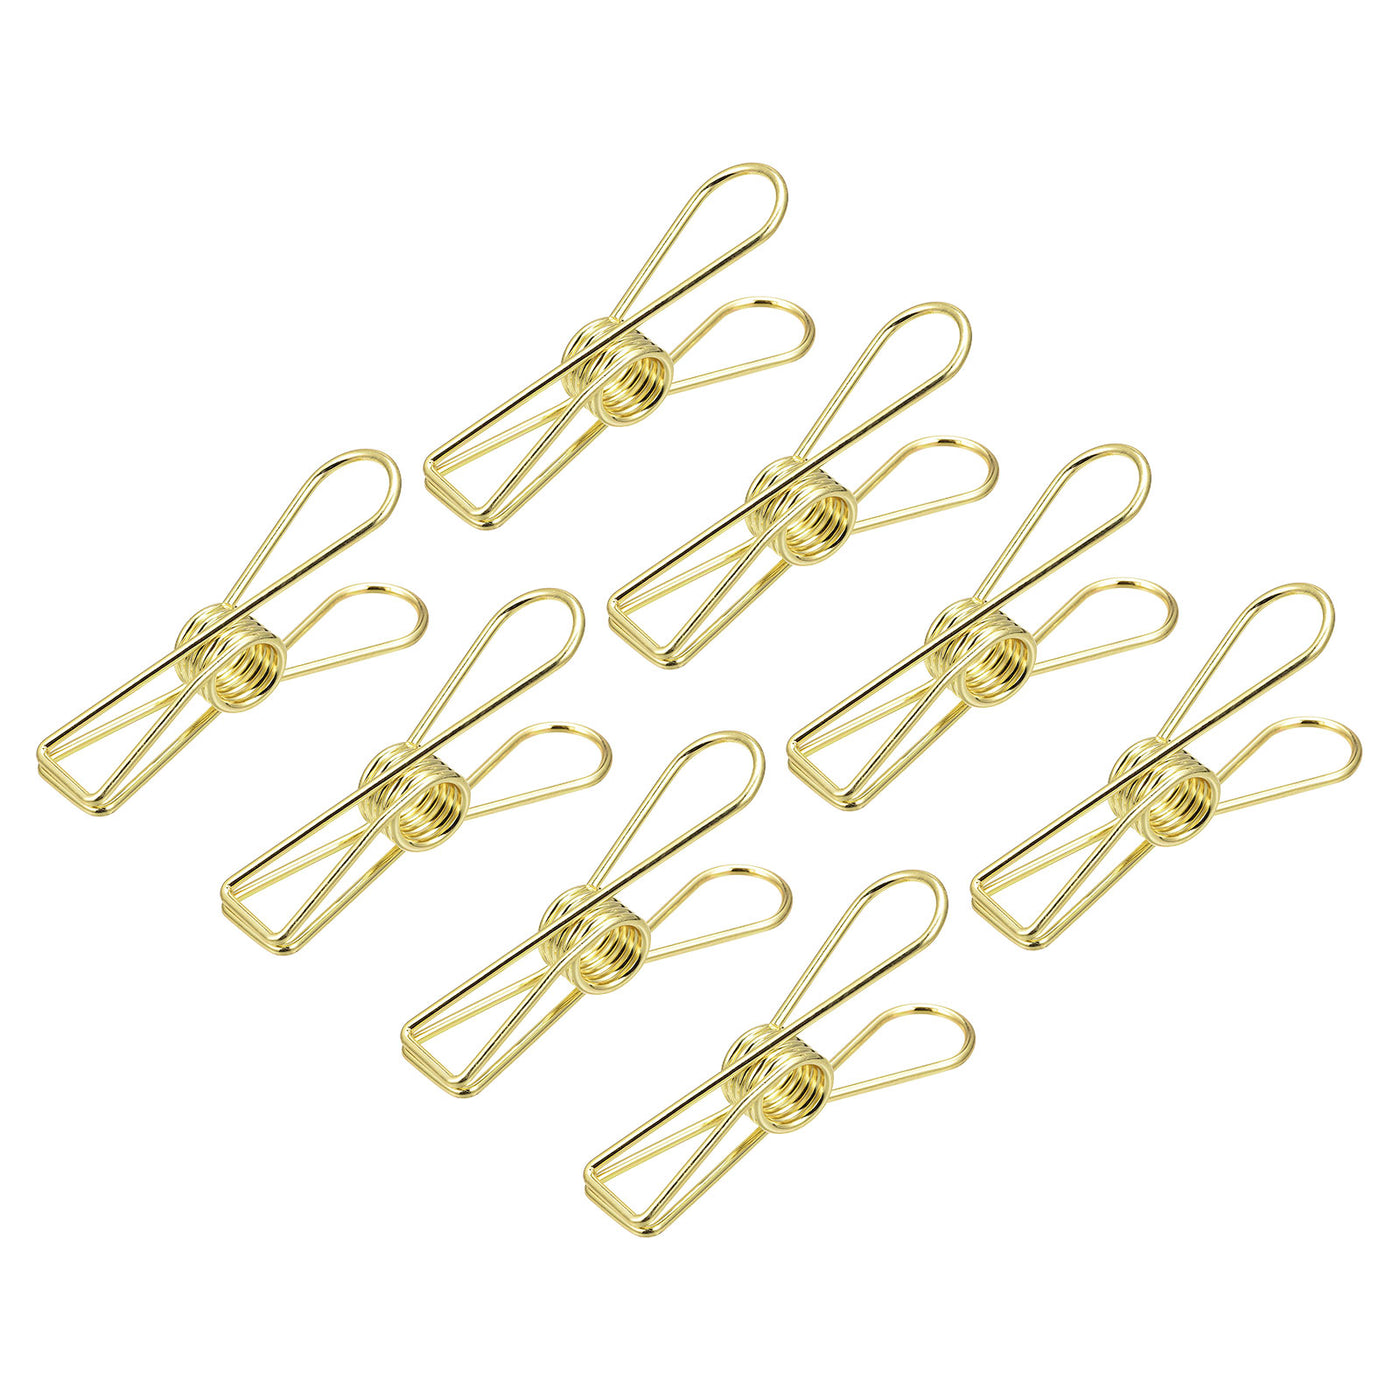 uxcell Uxcell Tablecloth Clips, 70mm Carbon Steel Clamps for Fix Table Cloth, Gold Tone 14 Pcs